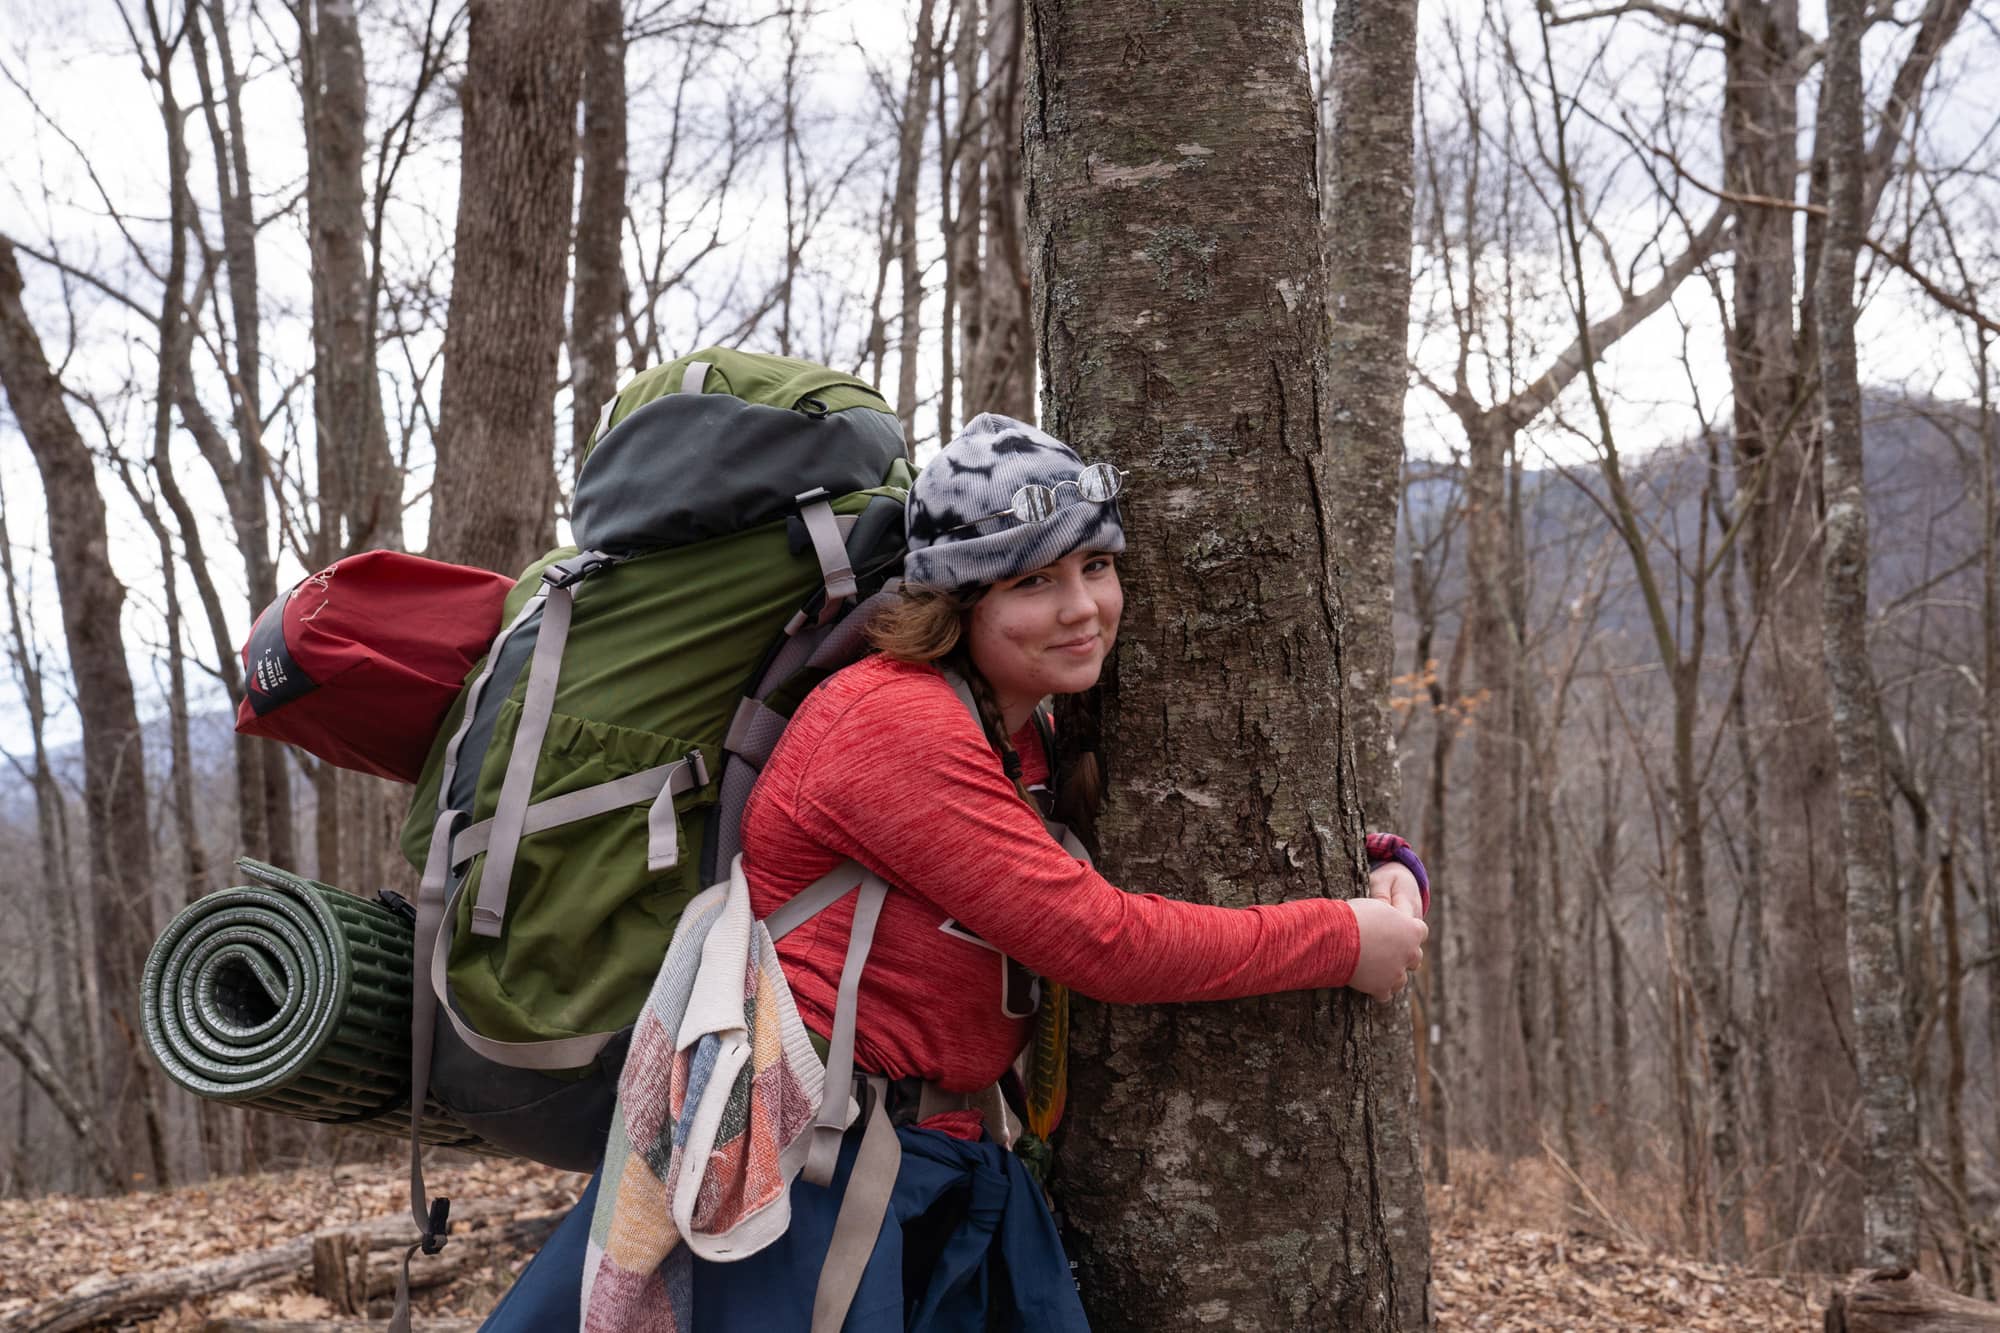 Helena Karlstrom hugs a tree as the group takes a short break during her second day backpacking a section of the Appalachian Trail in the Nantahala National Forest on Sunday, March 6, 2022, near Franklin, North Carolina.